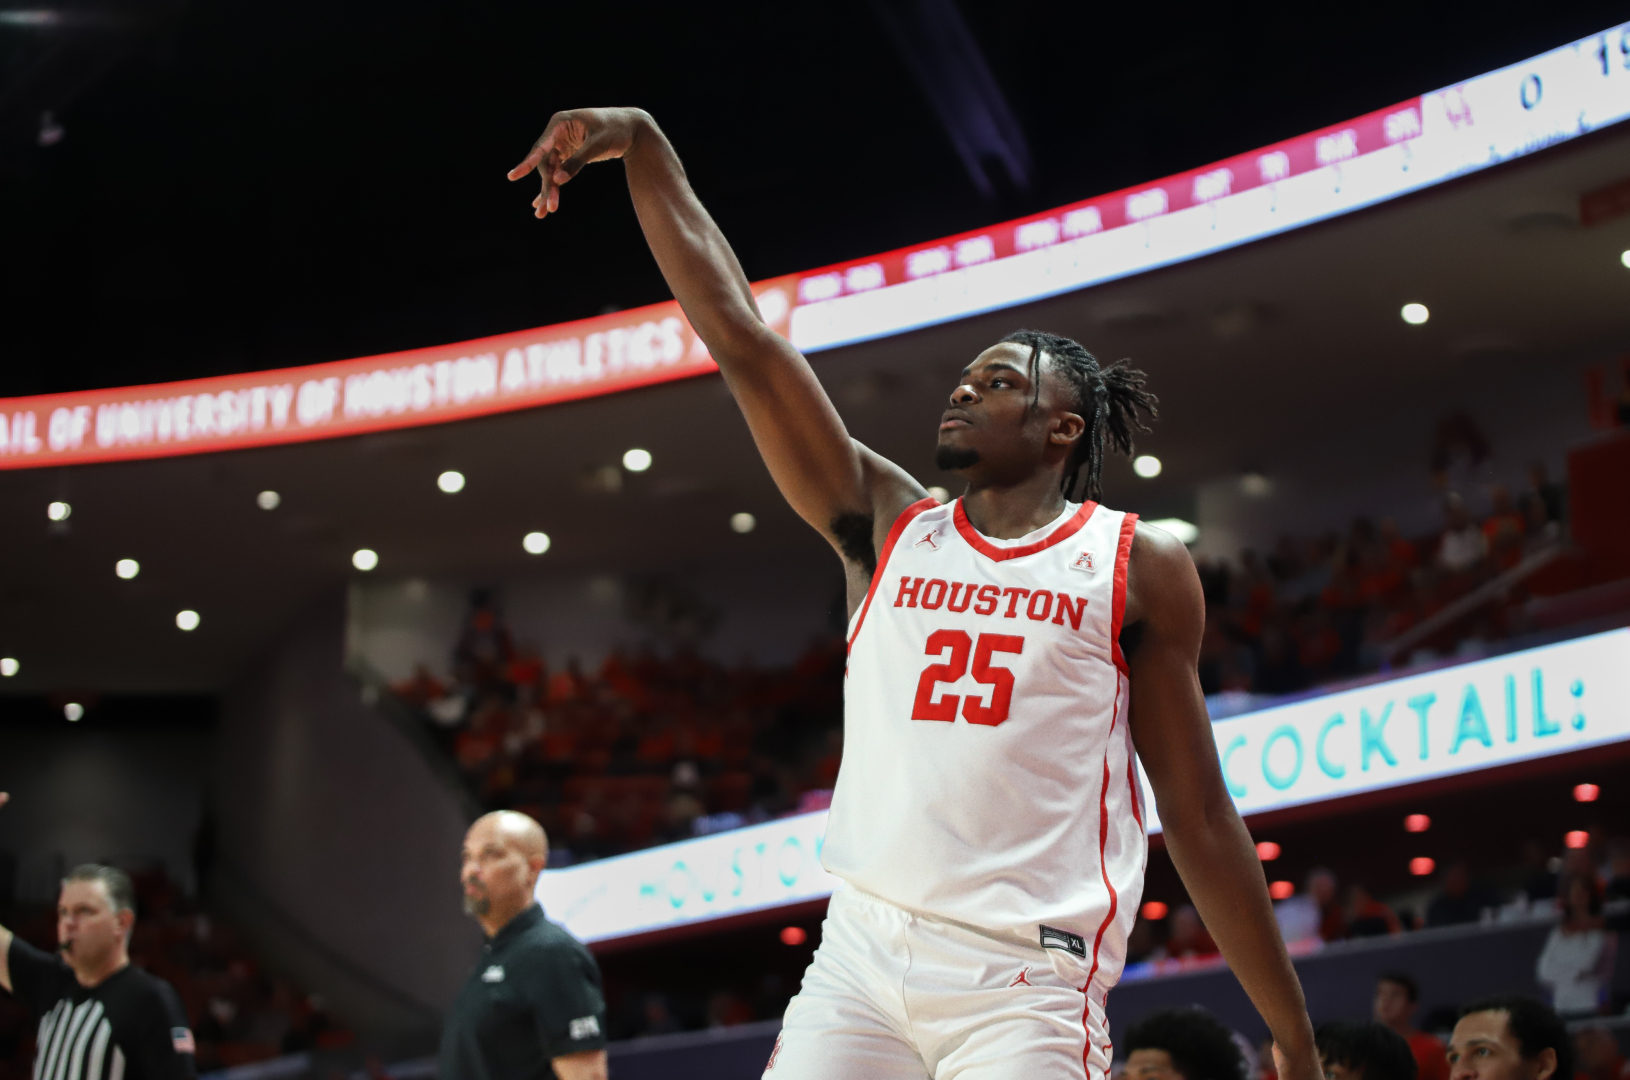 SMU had no answers for Jarace Walker as the UH freshman forward scored 23 points and pulling down 10 rebounds in the Cougars' blowout victory over the Mustangs on Thursday night at Fertitta Center. | Anh Le/The Cougar